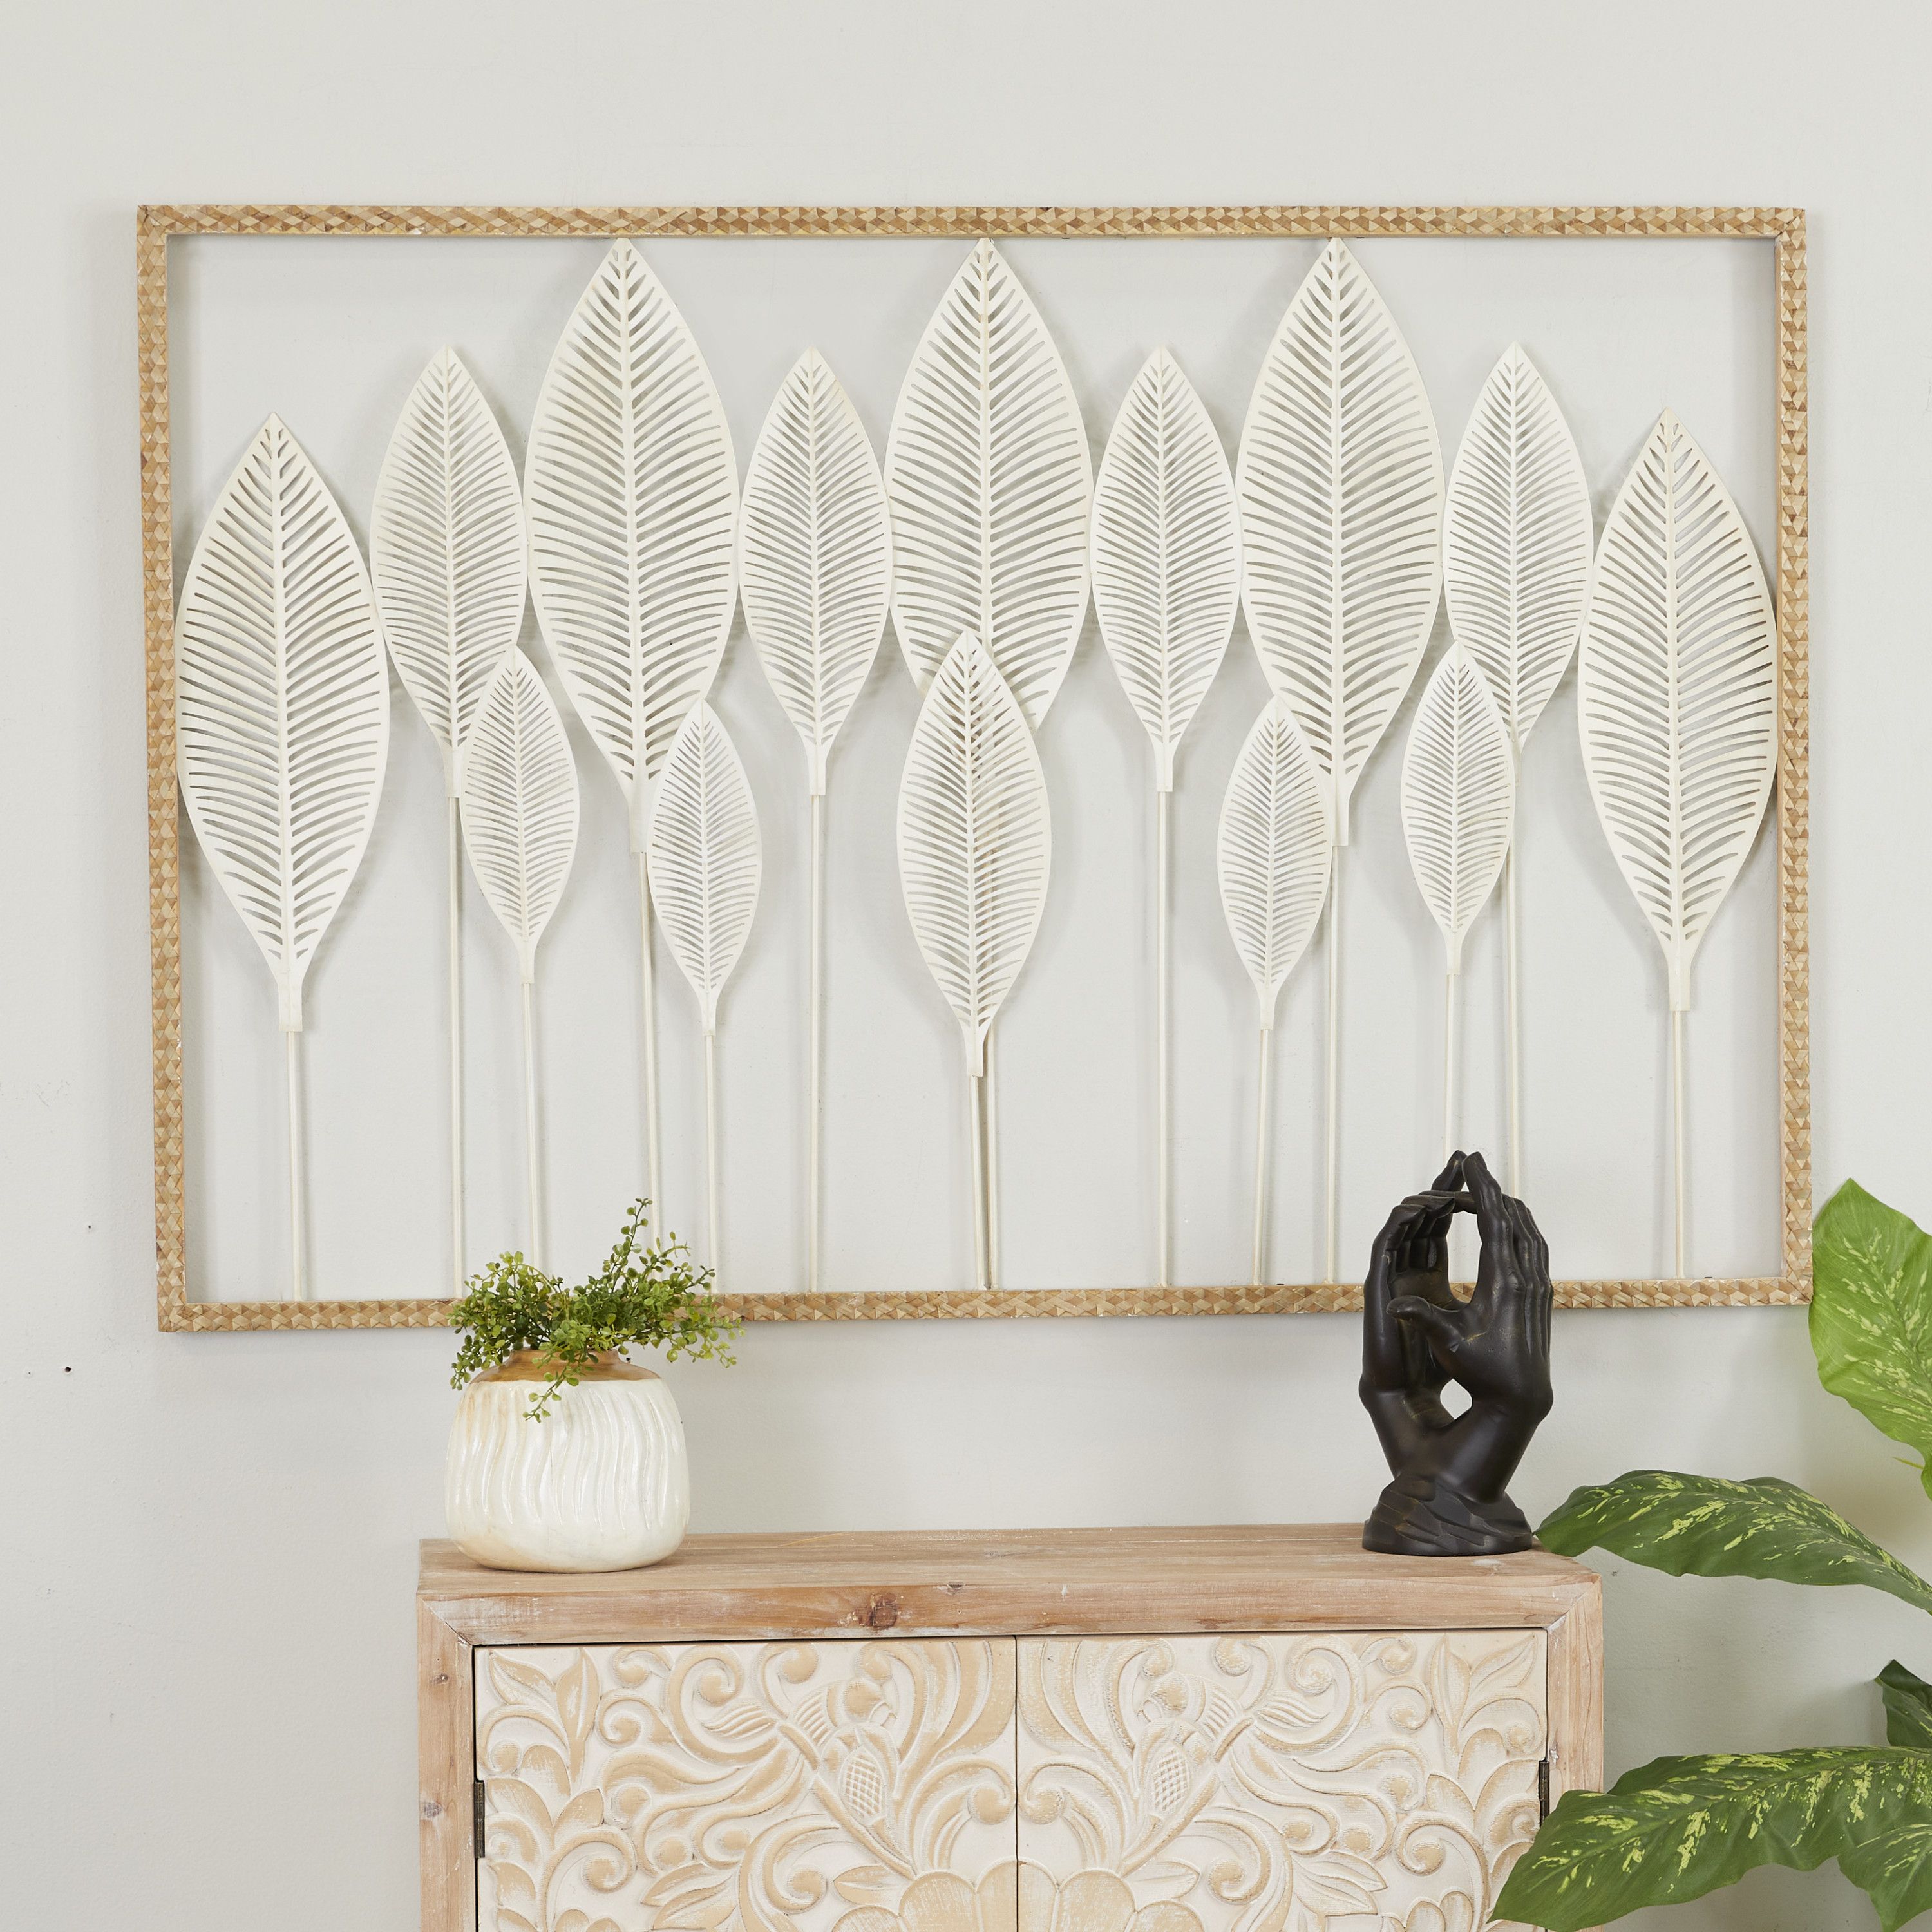 Decmode White Metal Tall Cut Out Leaf Wall Decor With Intricate Laser Cut  Designs – Walmart Intended For Tall Cut Out Leaf Wall Art (Photo 14 of 15)